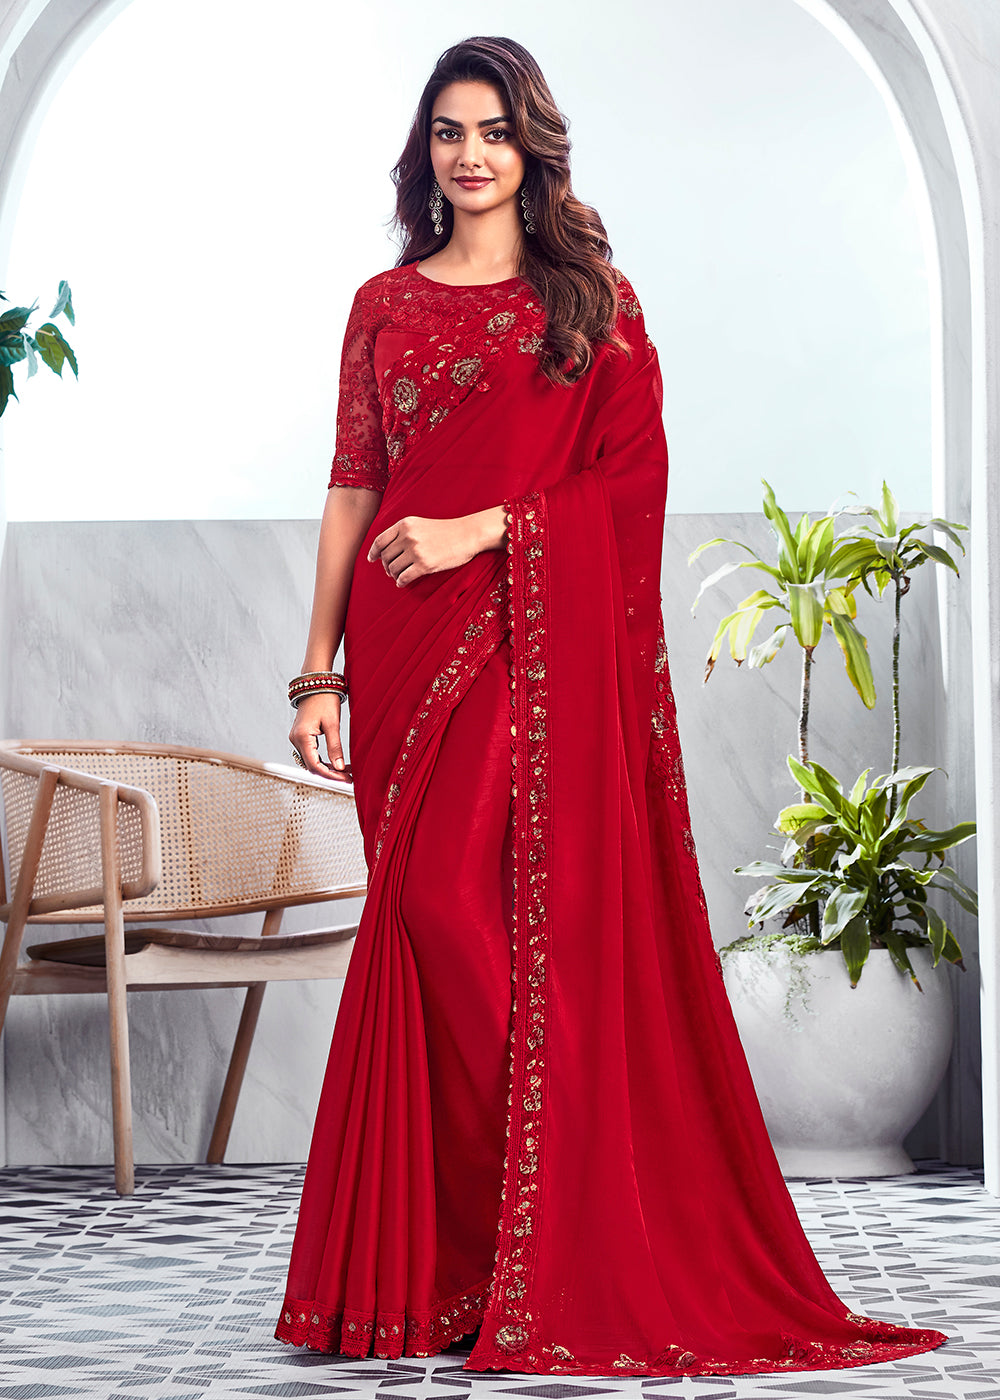 Buy Now Bewitching Red Silk Embroidered Designer Saree Online in USA, UK, Canada & Worldwide at Empress Clothing. 